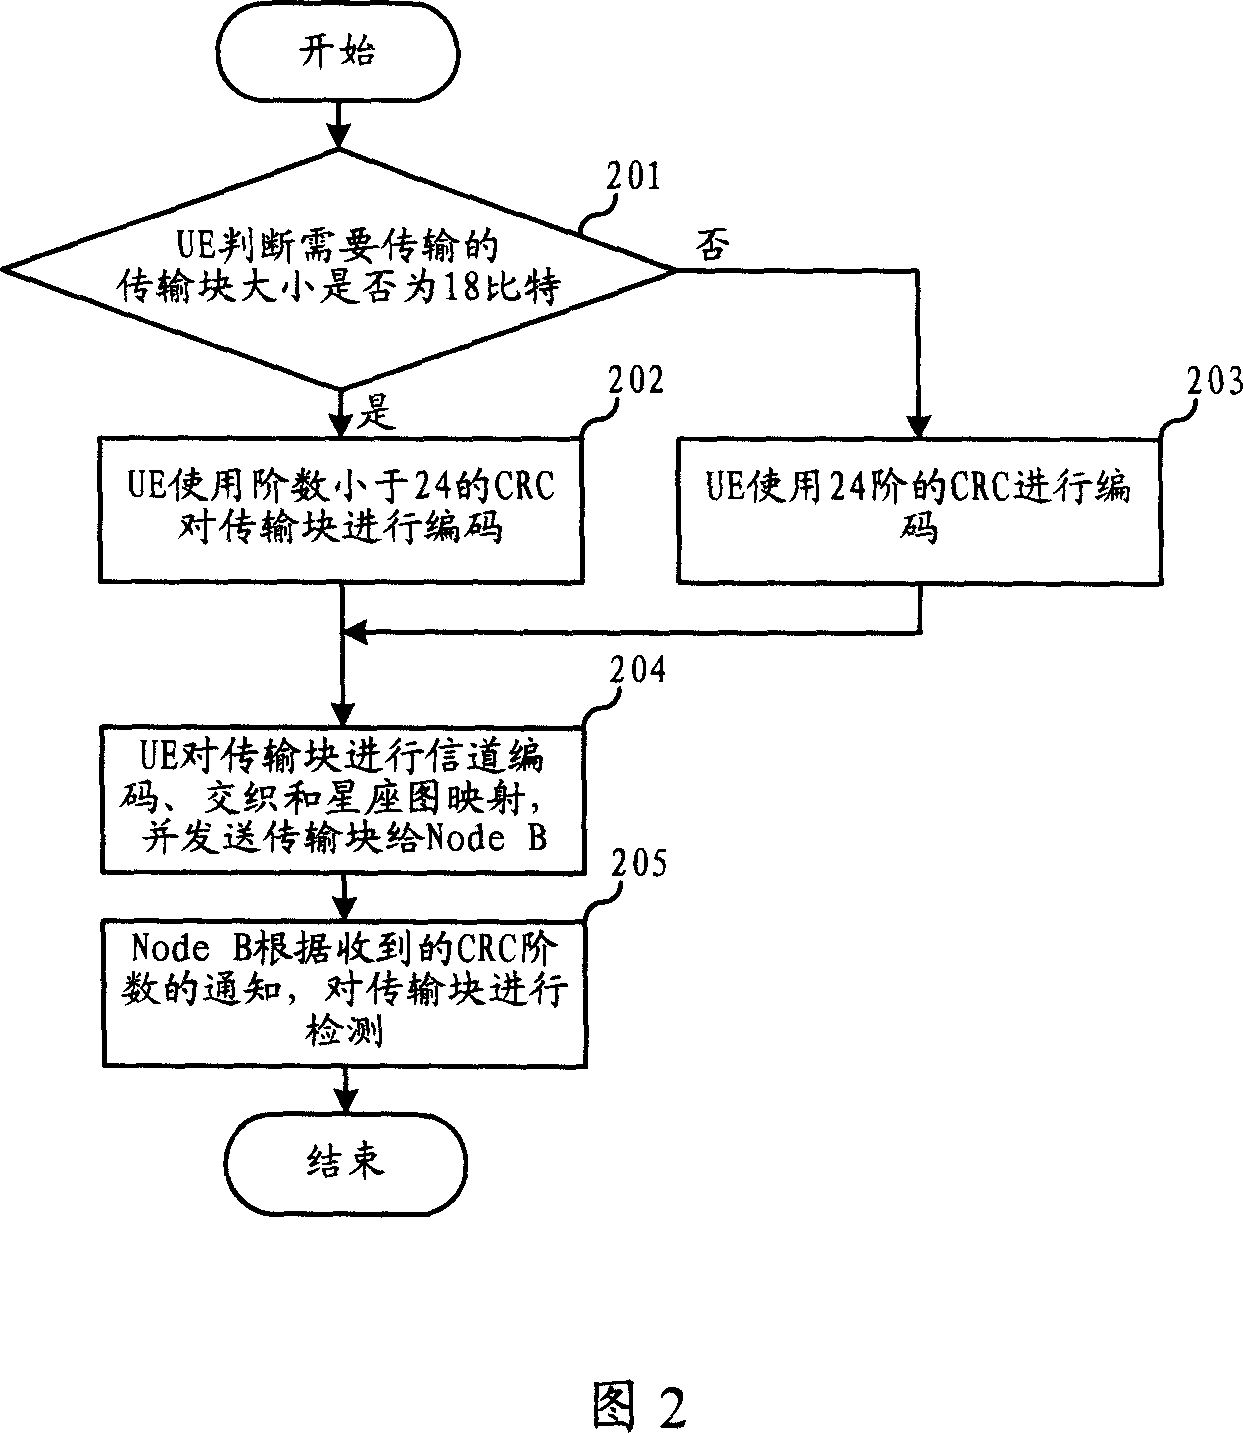 Scheduling information transmission method of E-DCH